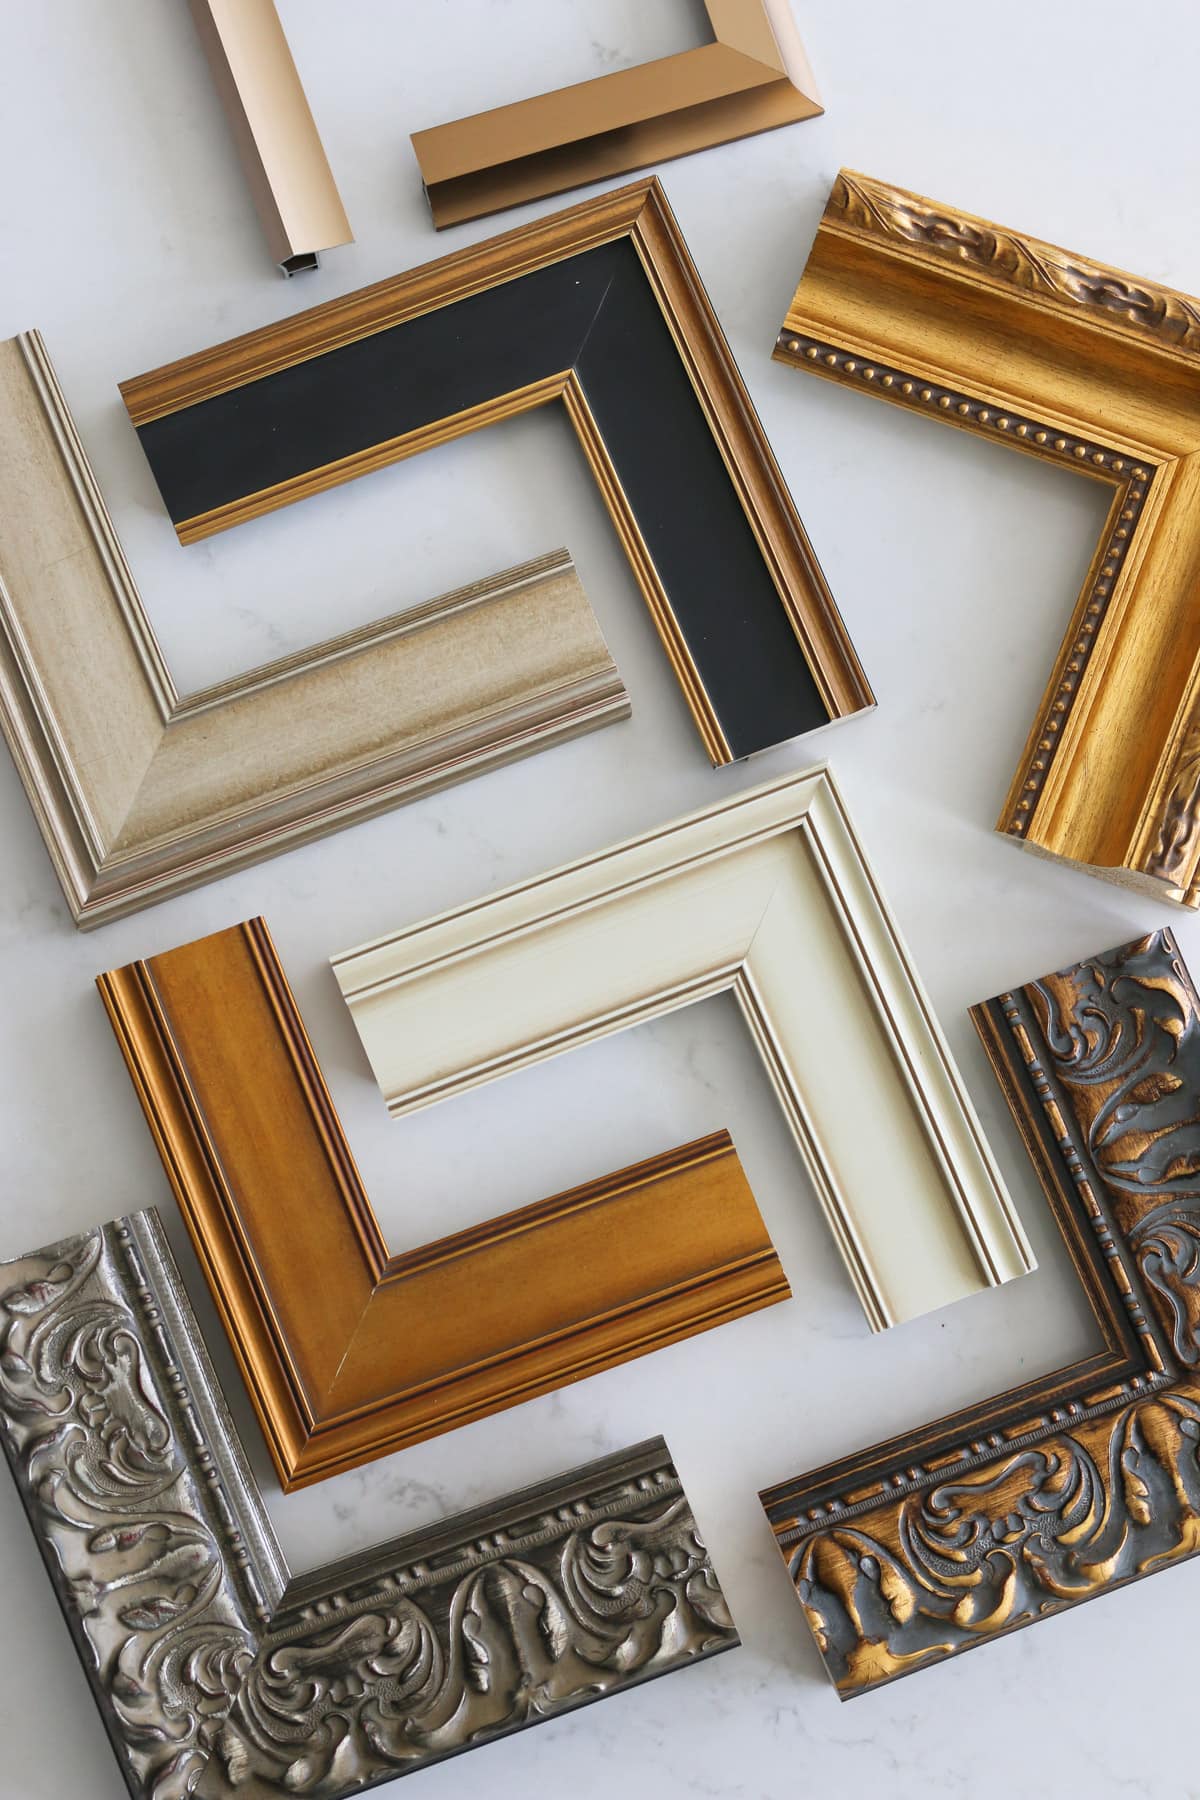 several samples of Deco TV Frames laid out on countertop